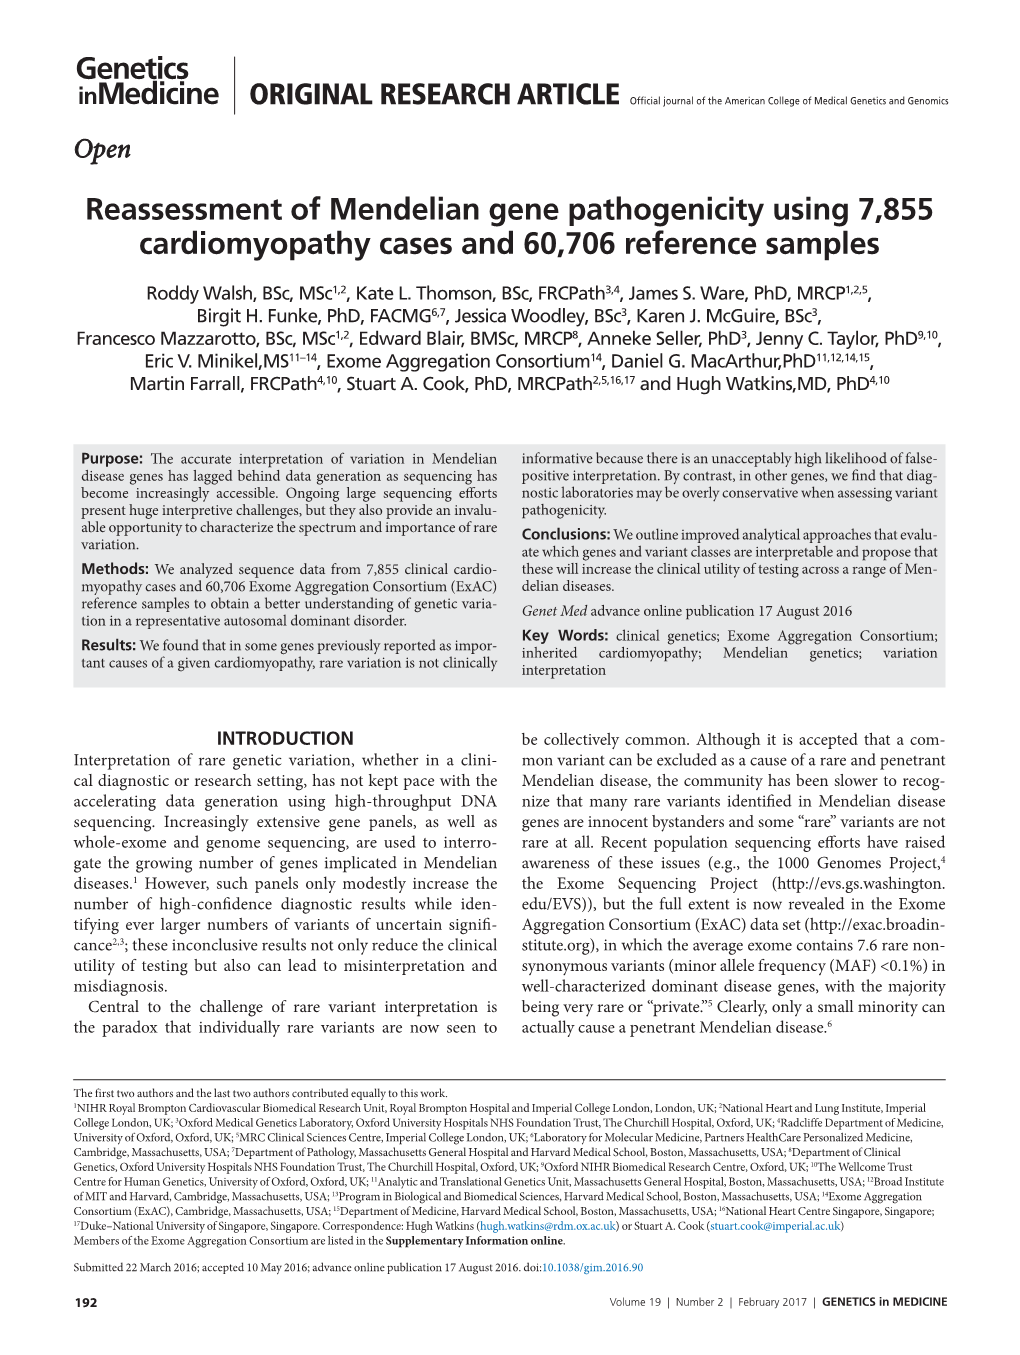 Reassessment of Mendelian Gene Pathogenicity Using 7,855 Cardiomyopathy Cases and 60,706 Reference Samples